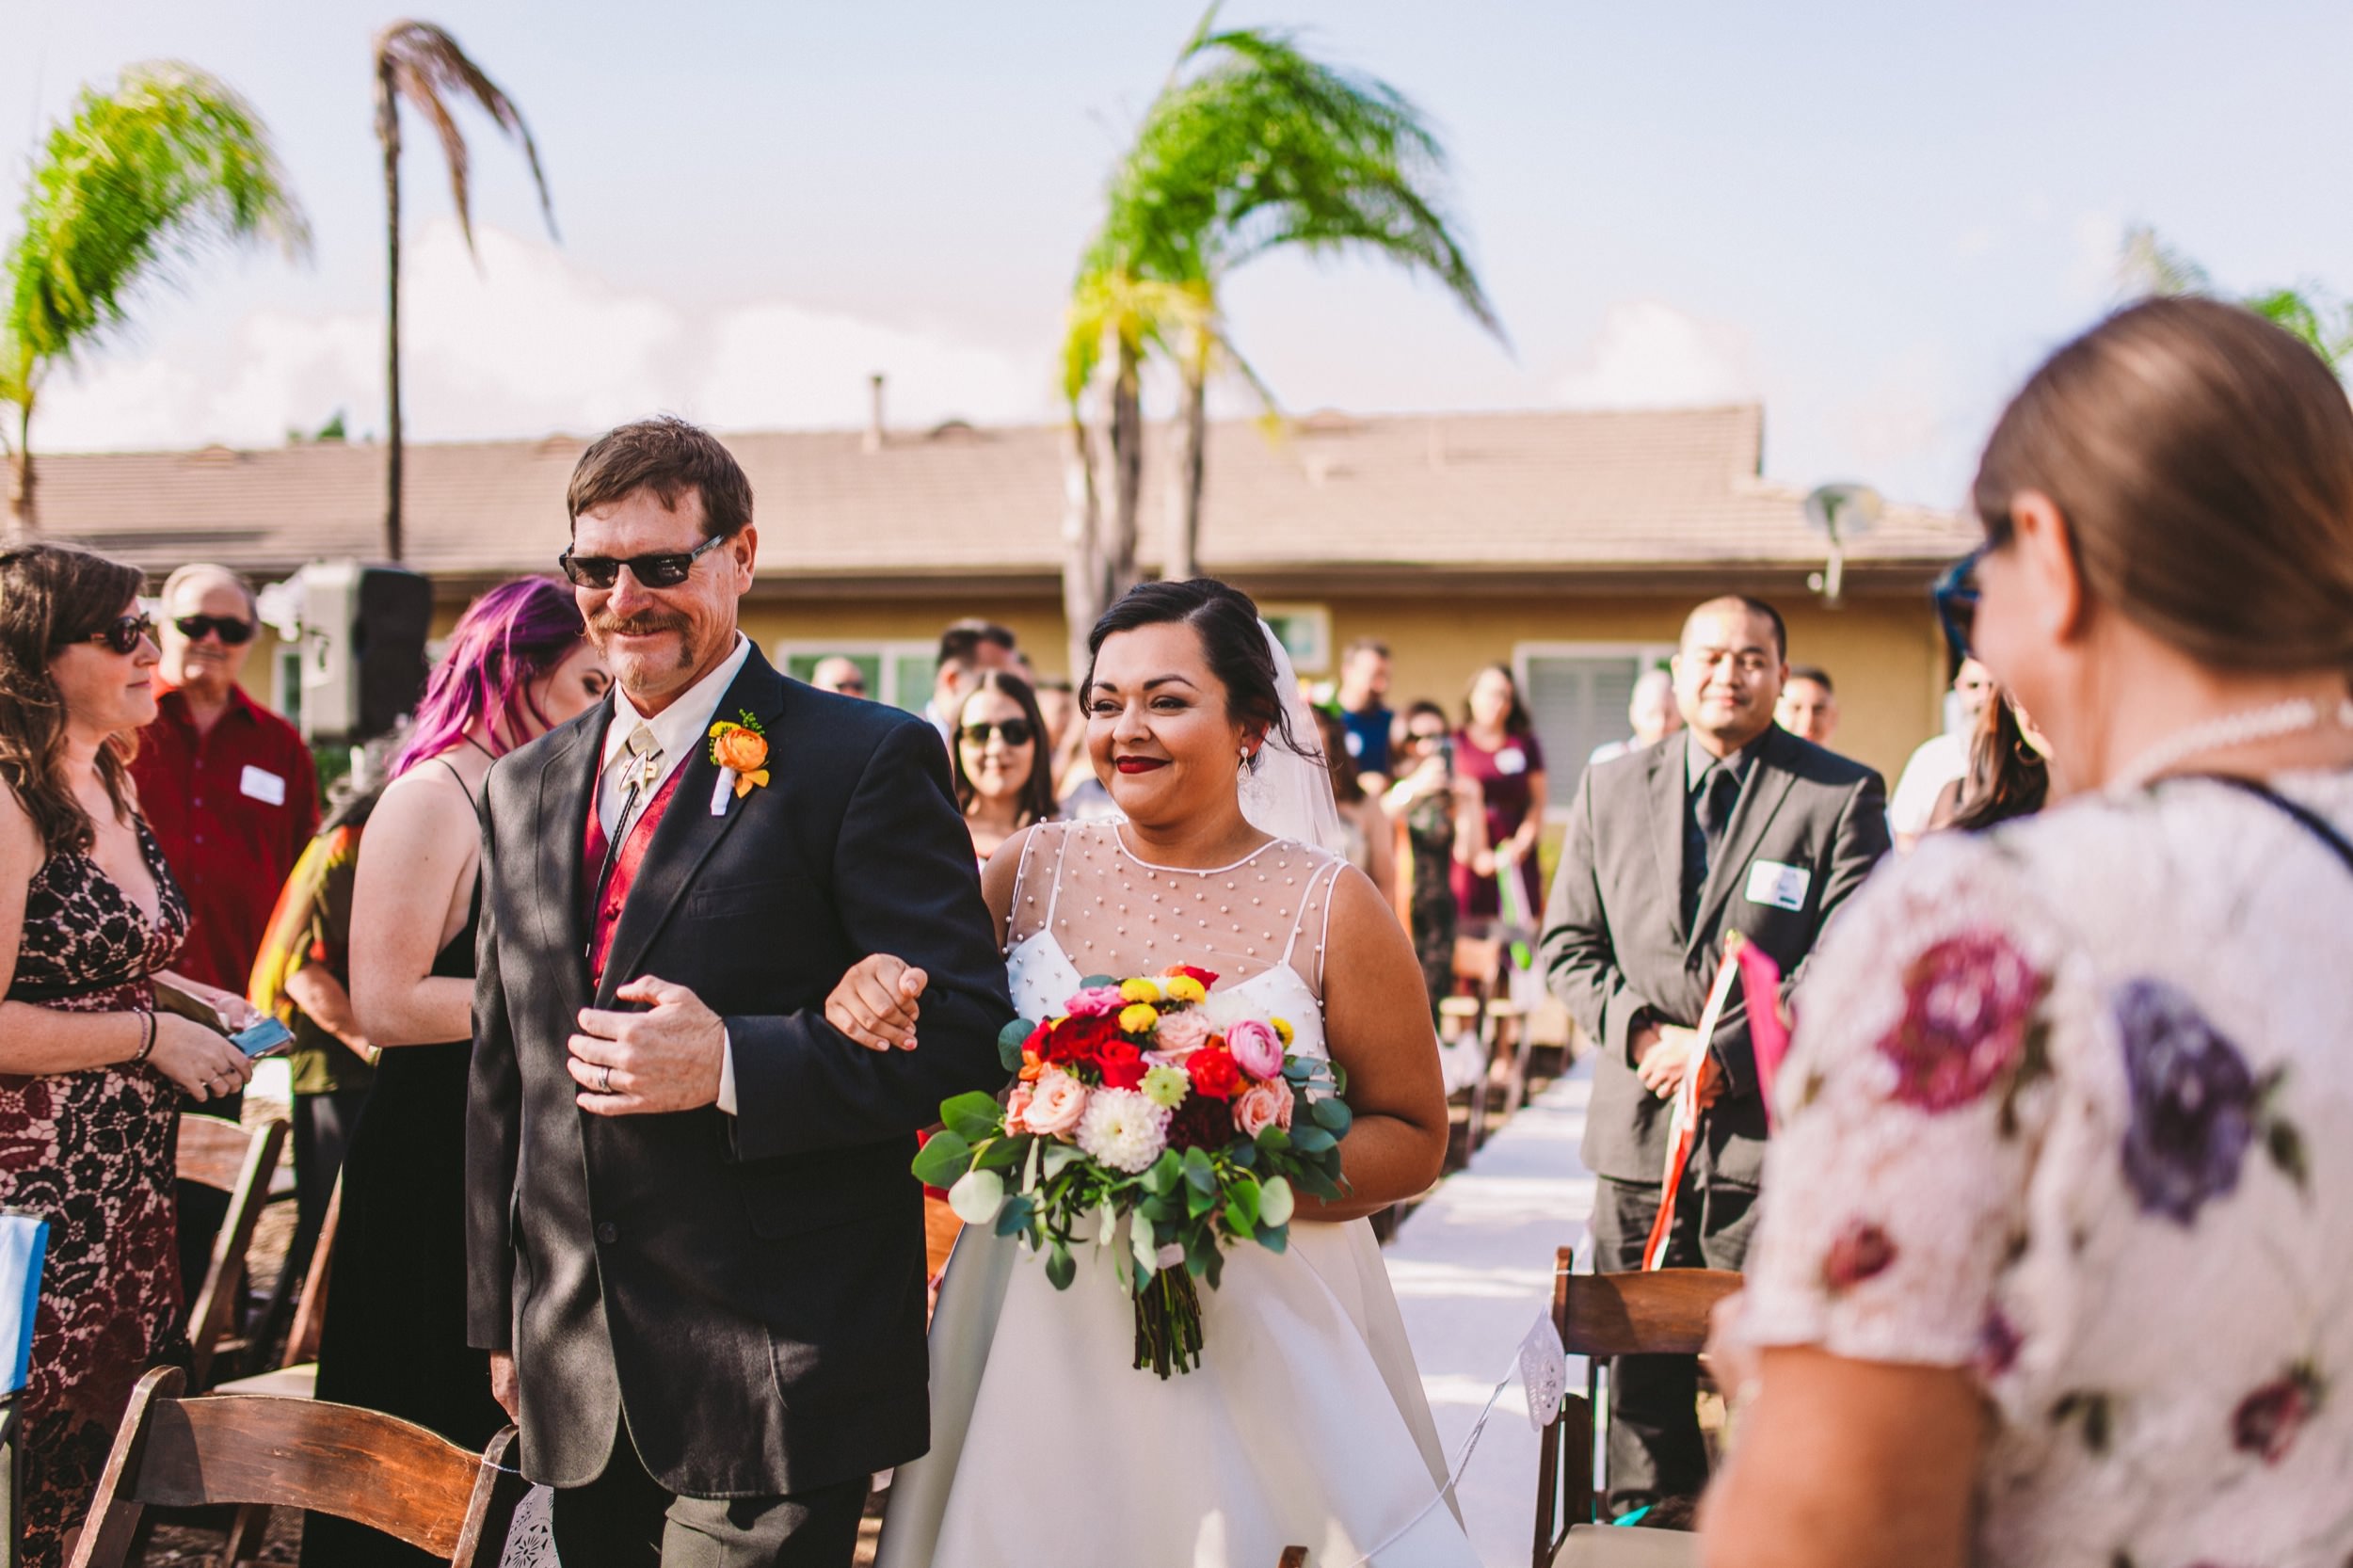 Intimate, Relaxed & Colorful Wedding Photography in Temecula-122.jpg